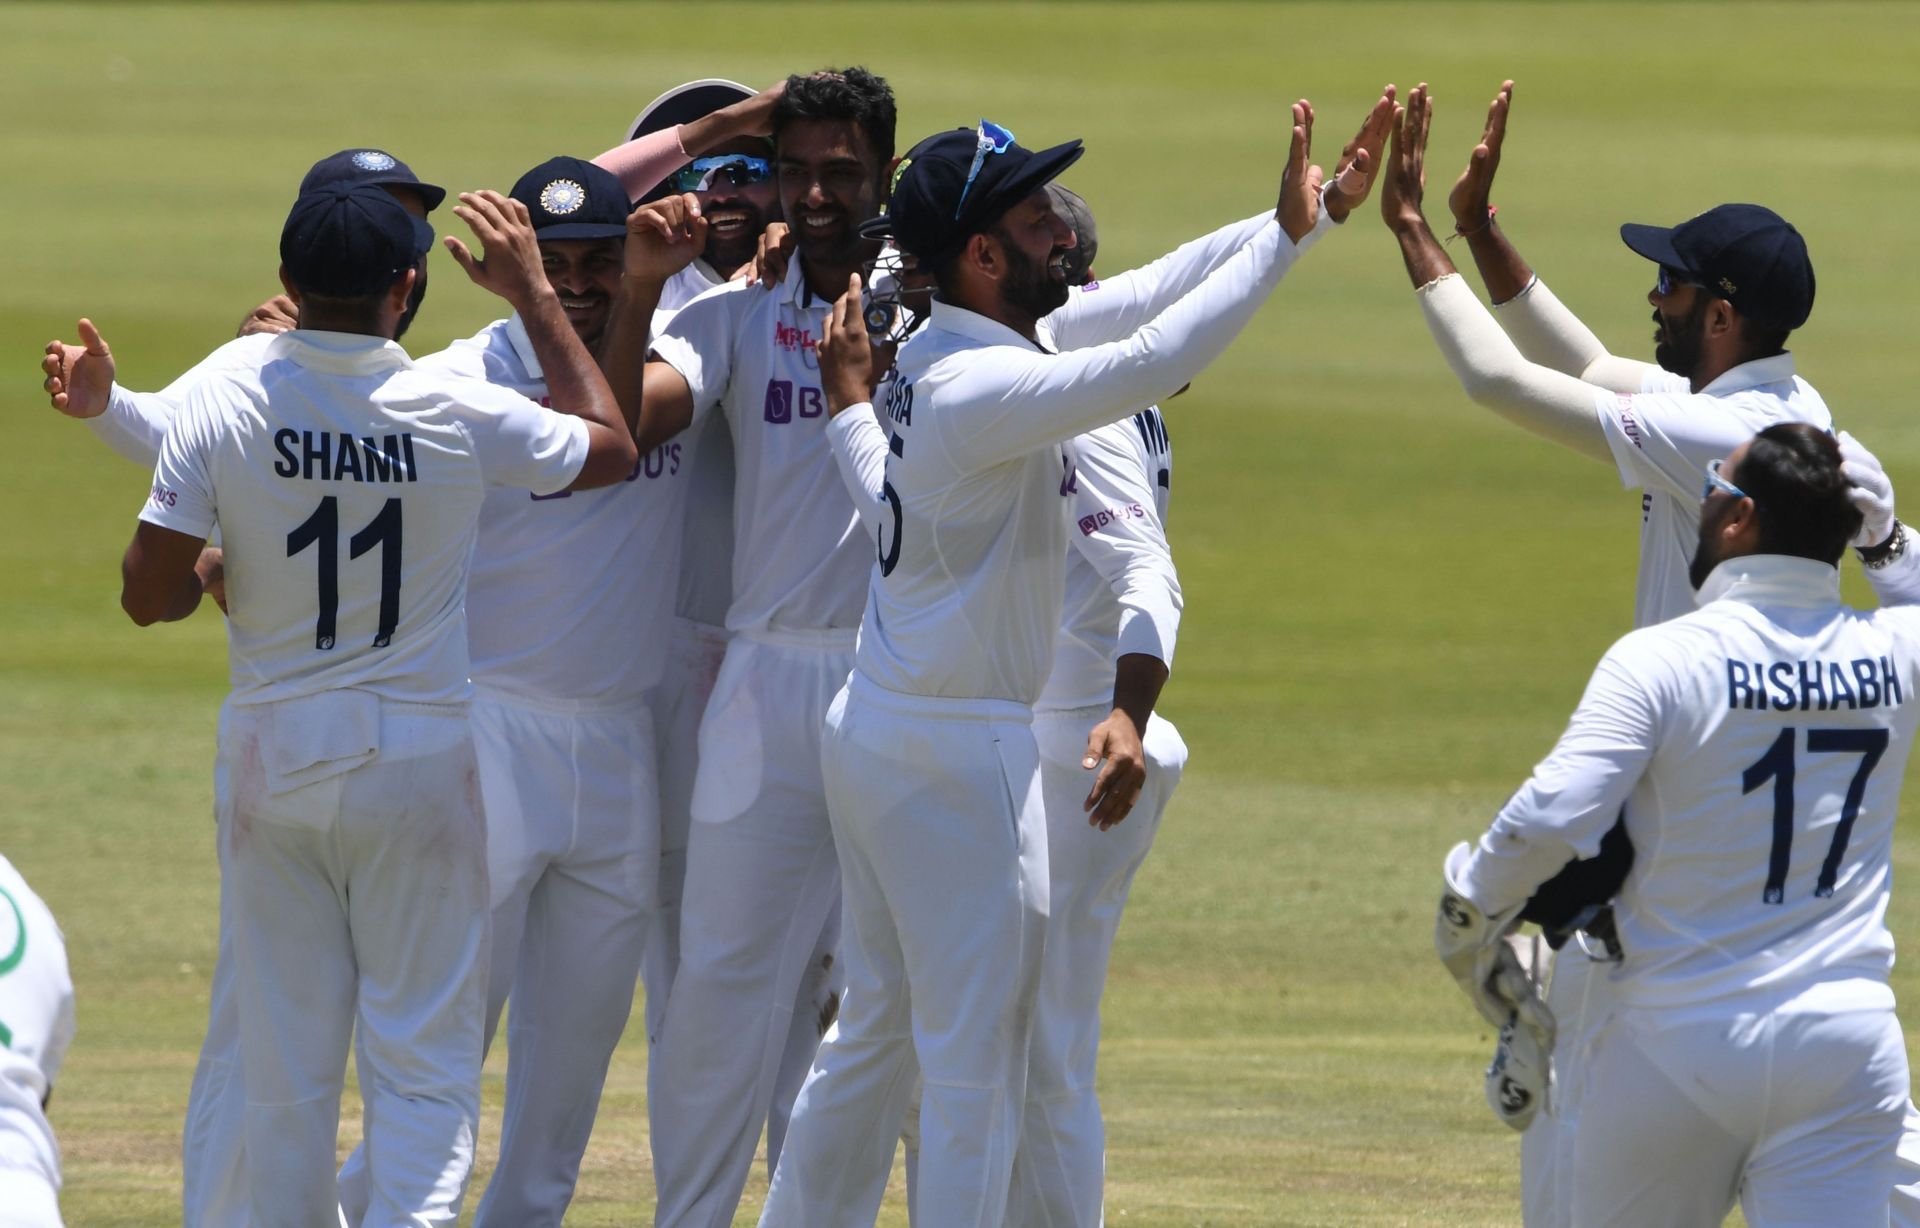 India won for the first time at Centurion in the Boxing Day Test